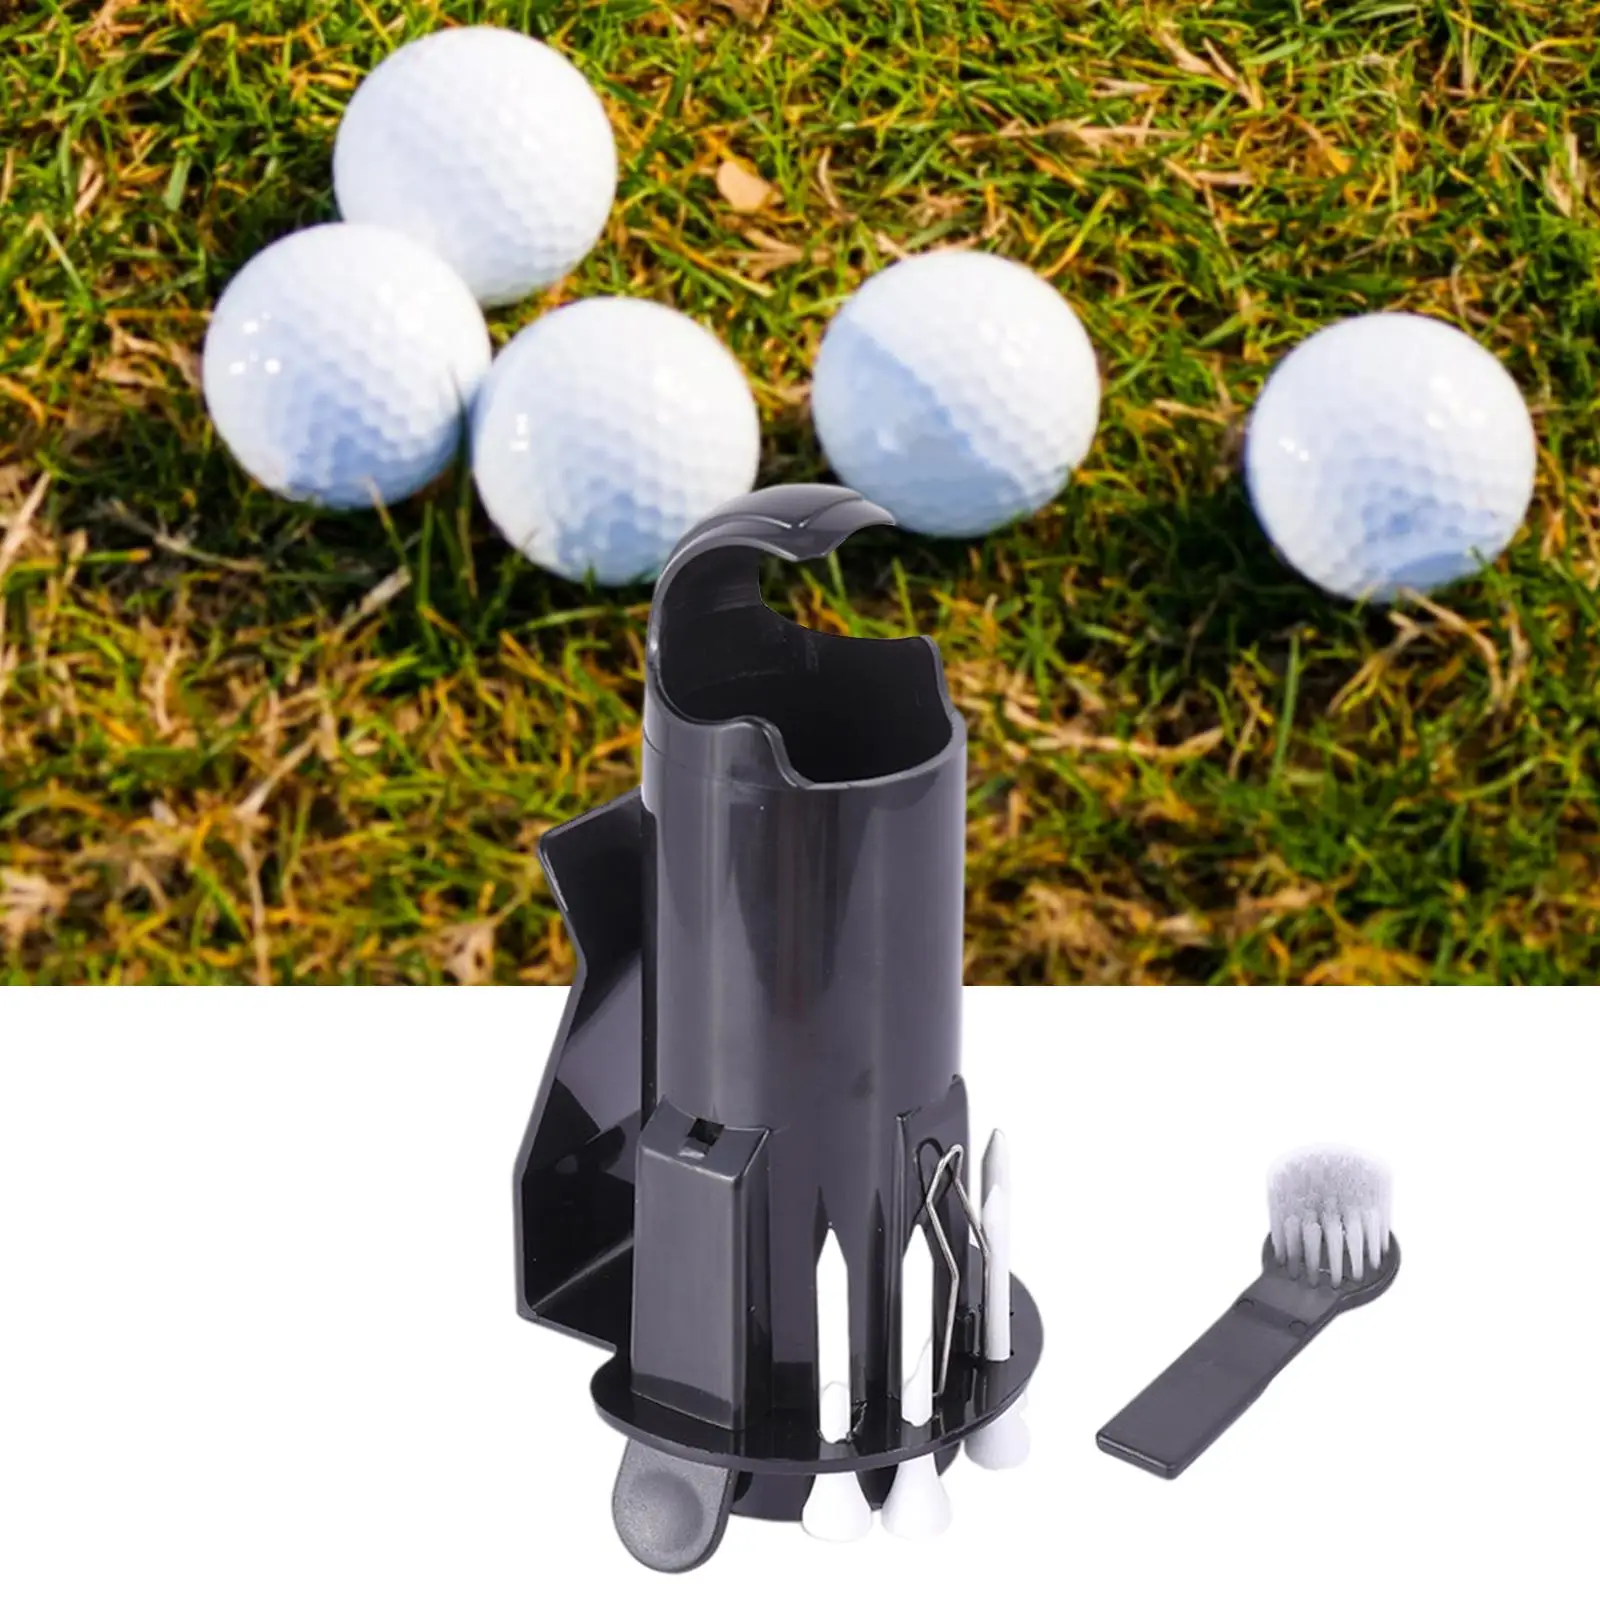 Portable Storage Golf Ball Tee Holder Pro Clip Caddy with Nylon Brush Divot Cleaning Tool